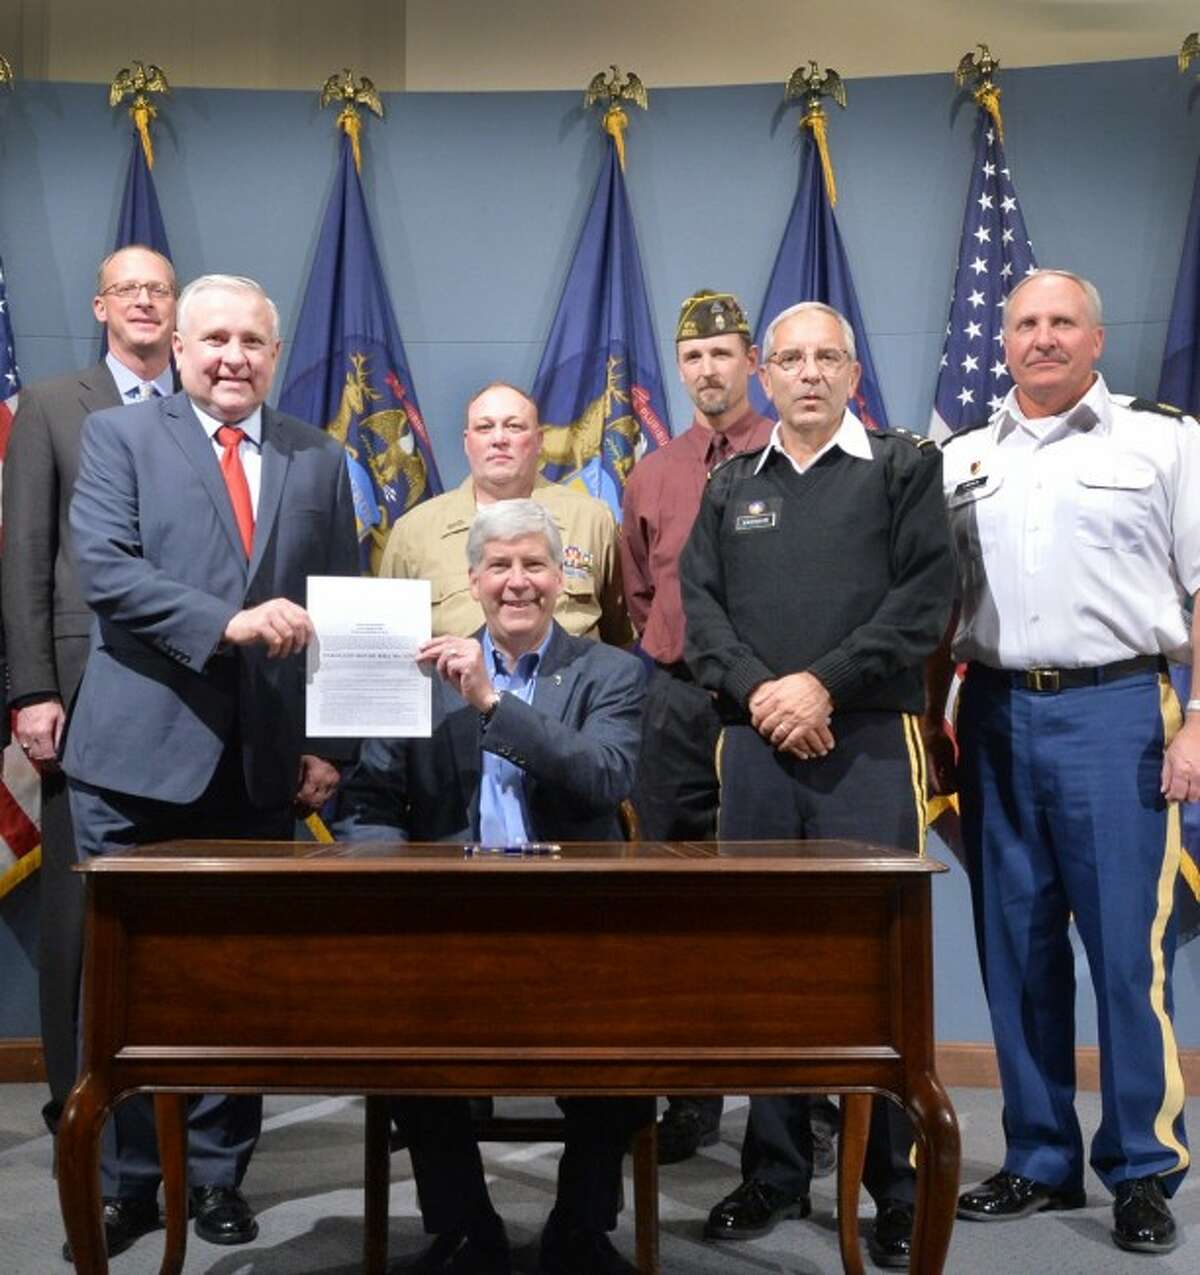 Pictured with State Rep. Ray Franz and Gov. Rick Snyder as he signs the veterans bill are from left: Steve Kozera from the Michigan Department of Military and Veterans Affairs; Manistee County veterans Tony Covell; Jeffrey Franz; Major General Gregory Vadnais; and Command Sergeant Major Dan Lincoln.